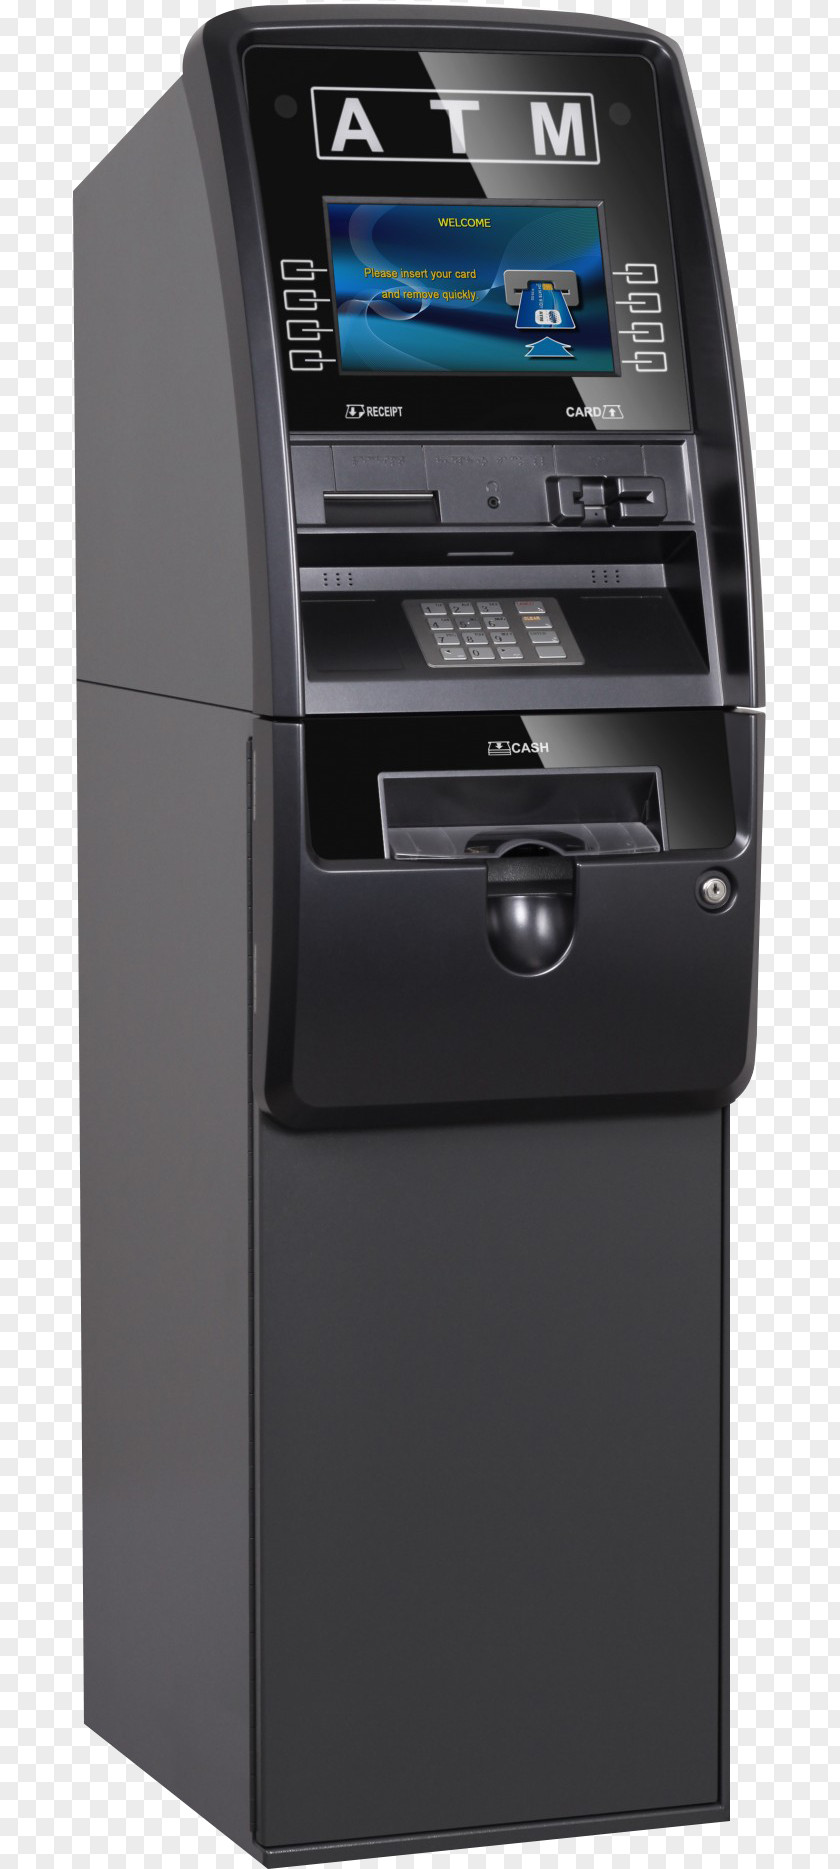 Atm Automated Teller Machine EMV ATM Card Empire Group PNG